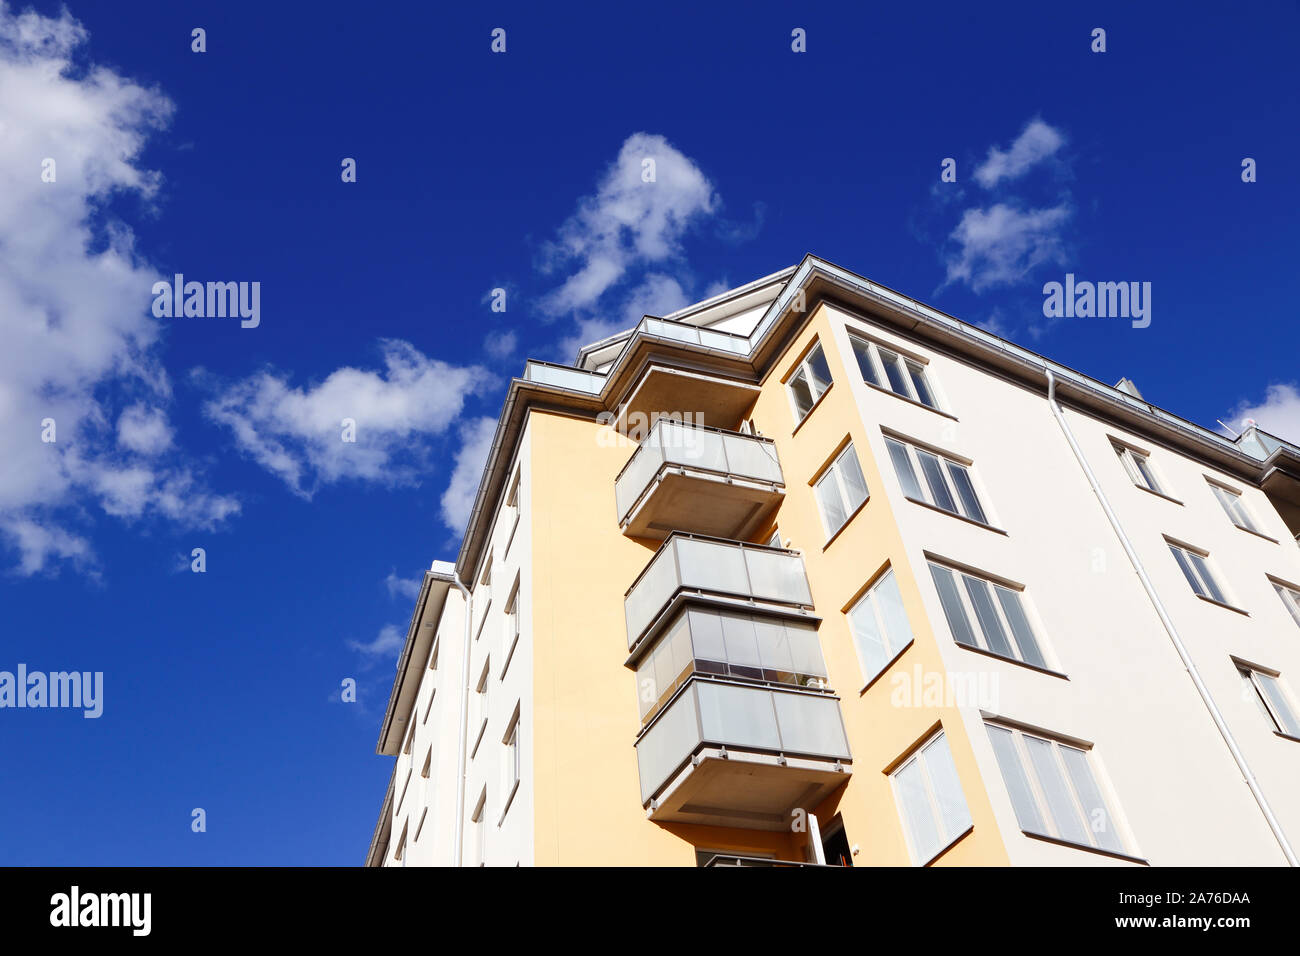 Low angle view of a high-rise residential apartment building. Stock Photo